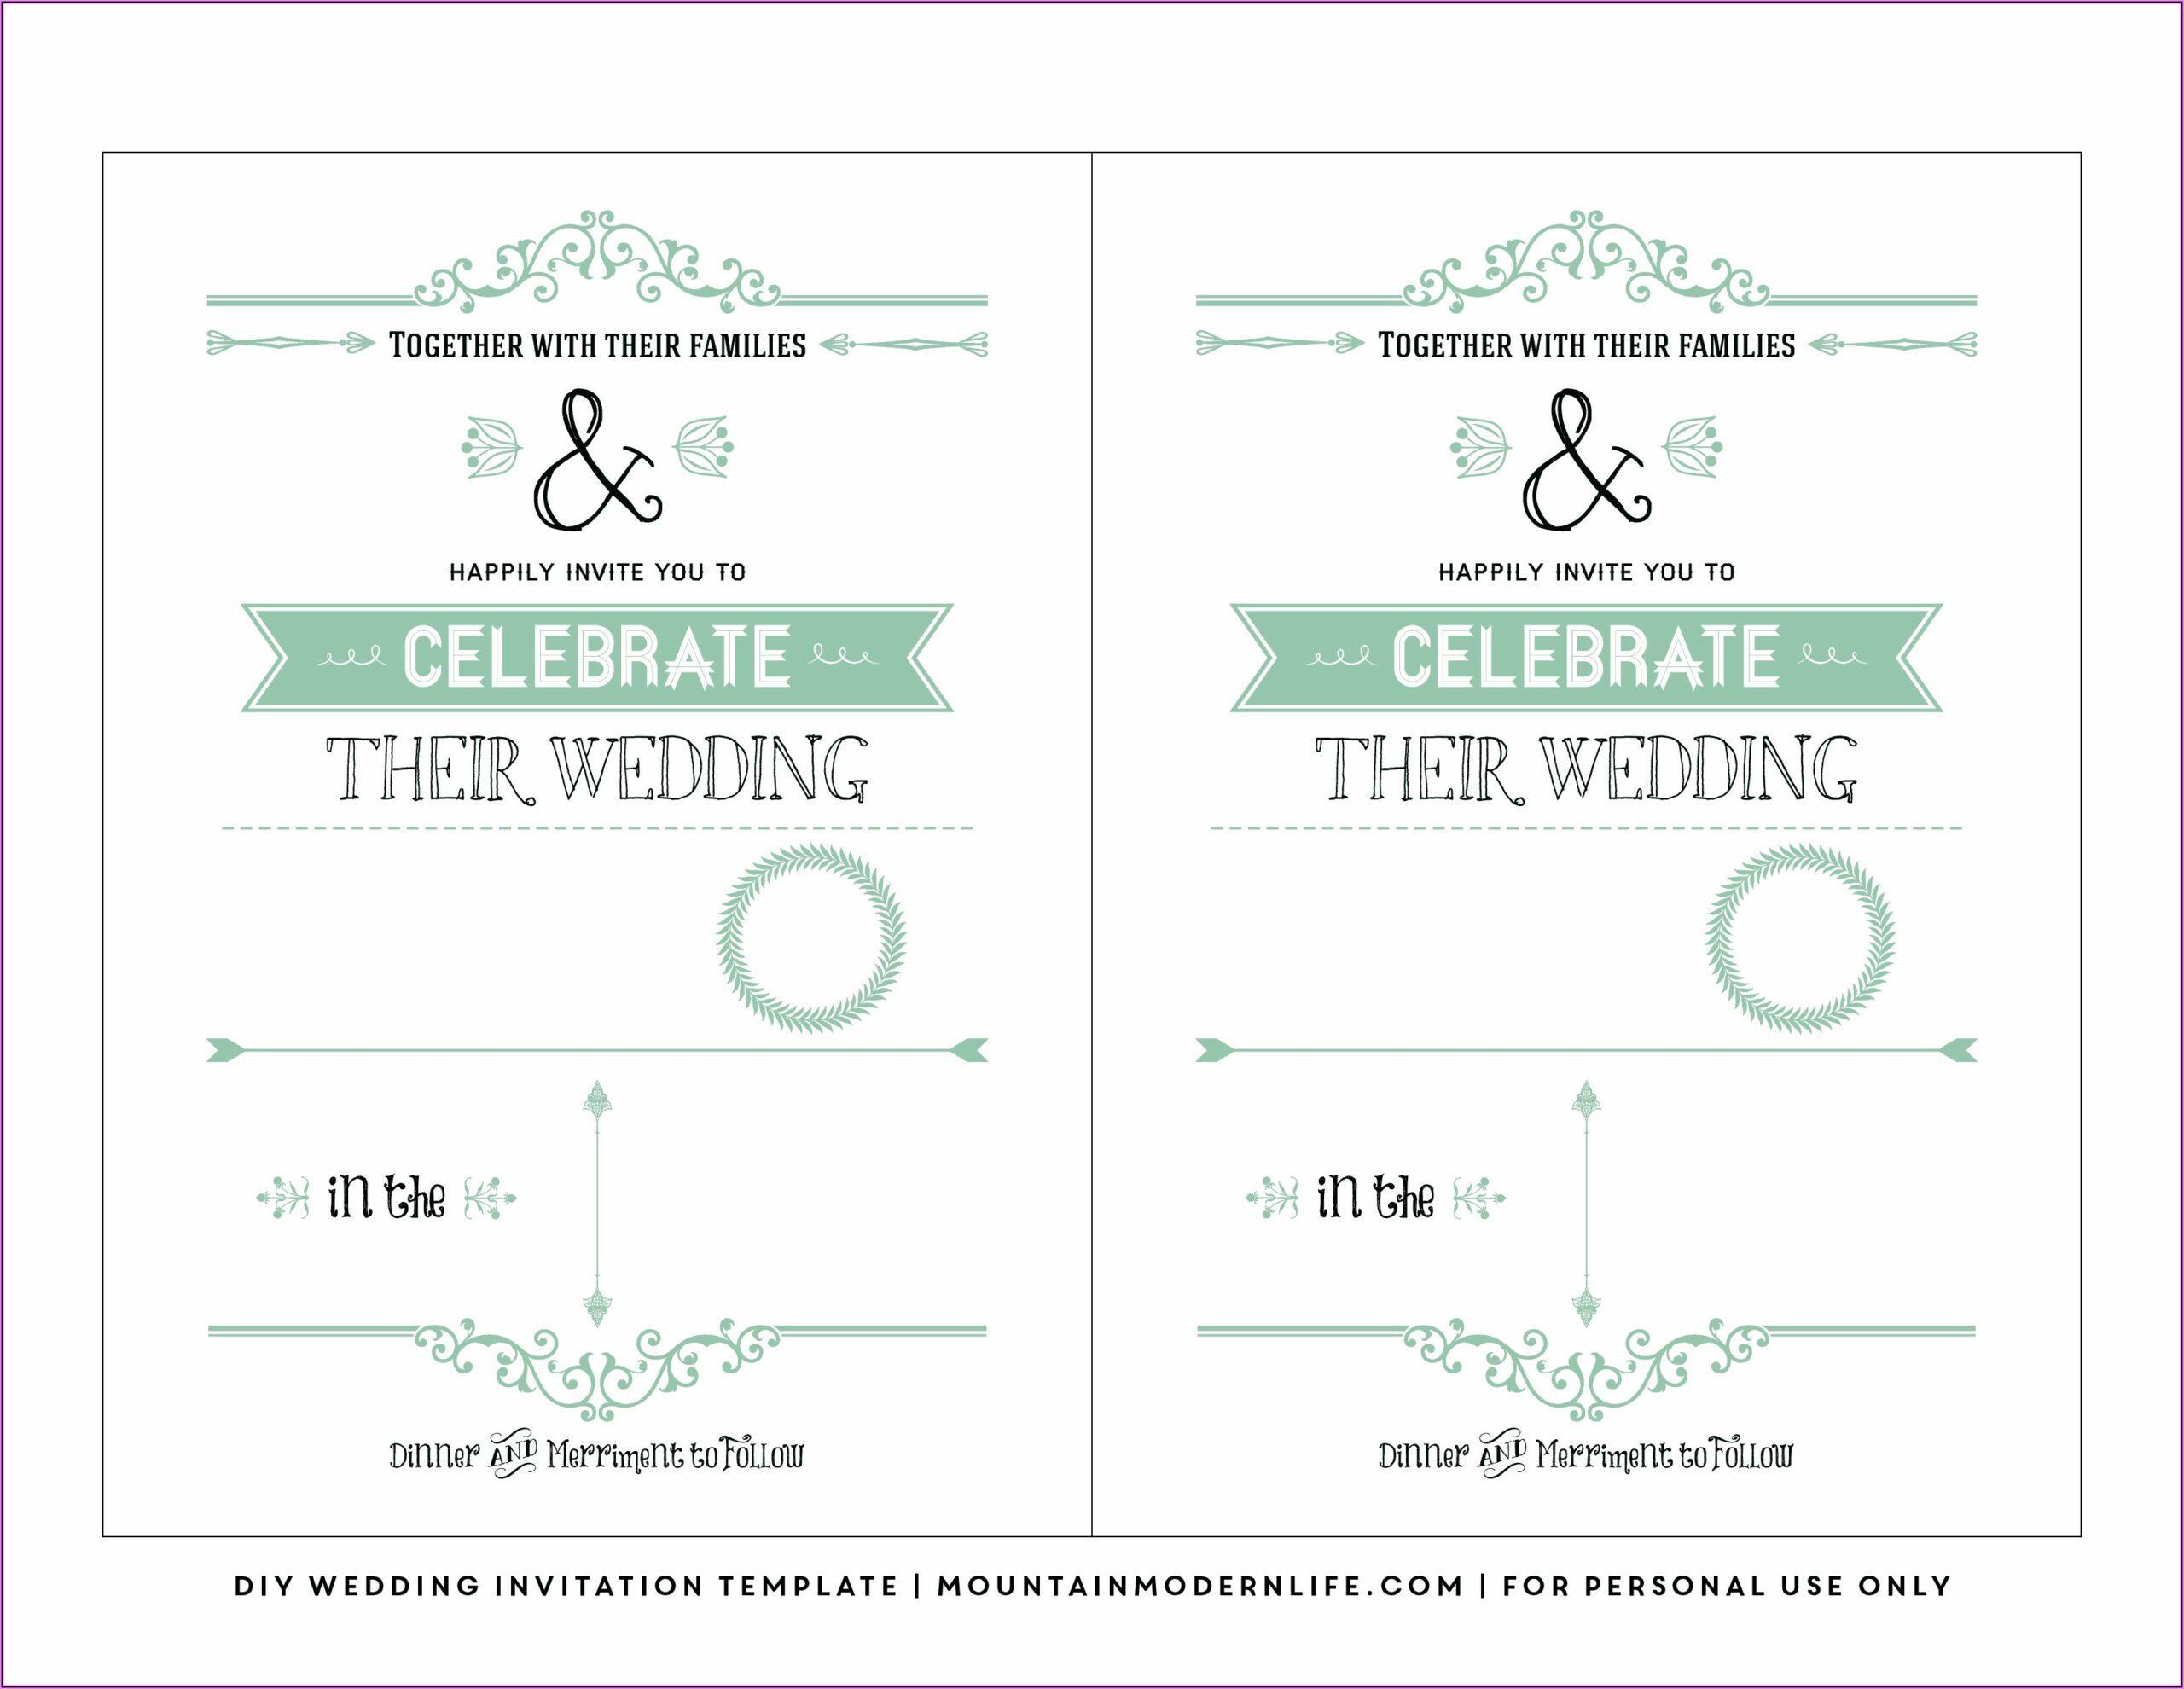 Invitation Card Format Png